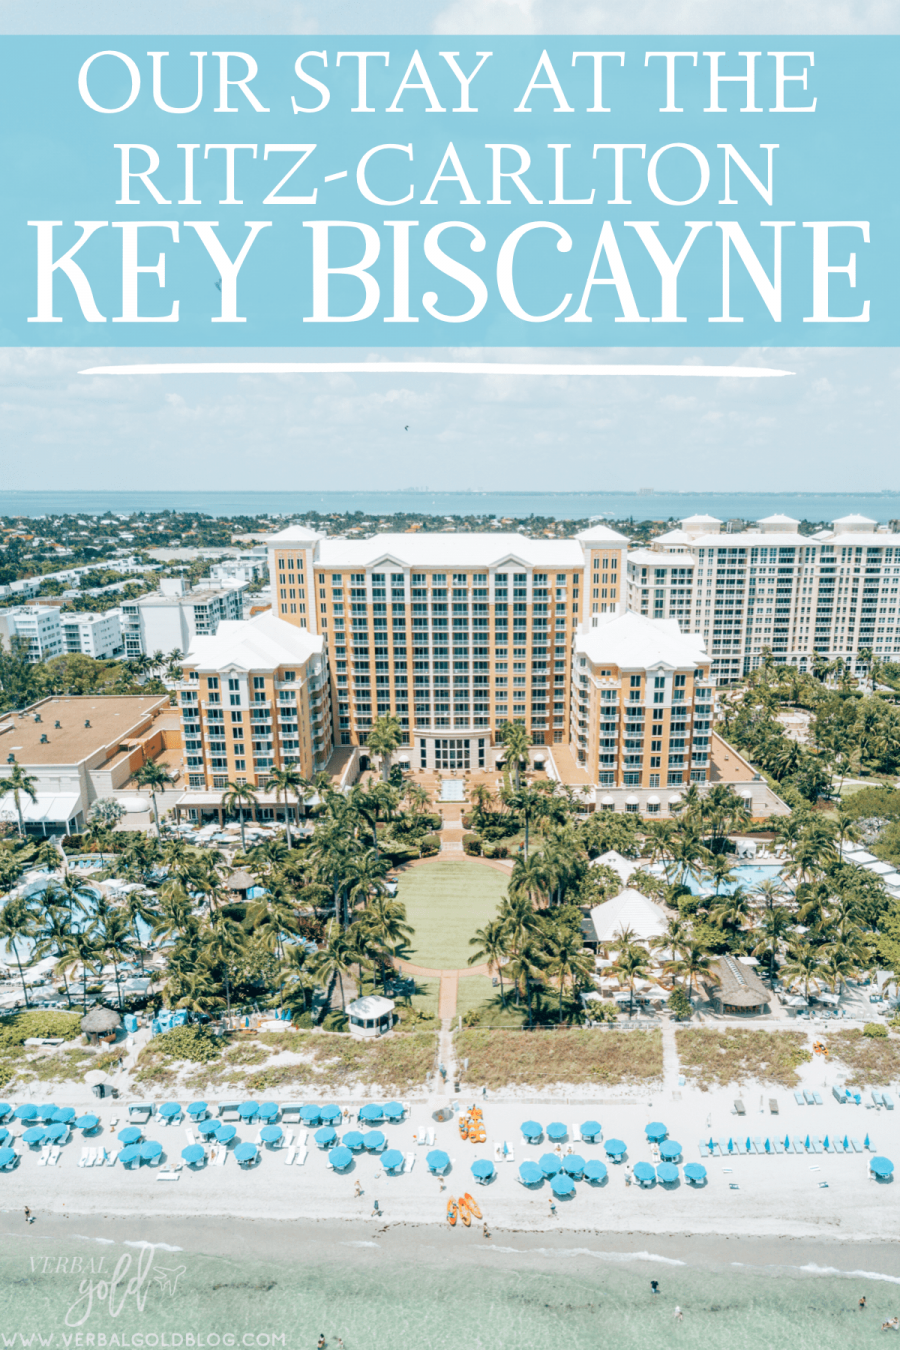 Wondering where to stay in Miami? This resort is everything! Read our review on our stay at the Ritz-Carlton Key Biscayne!